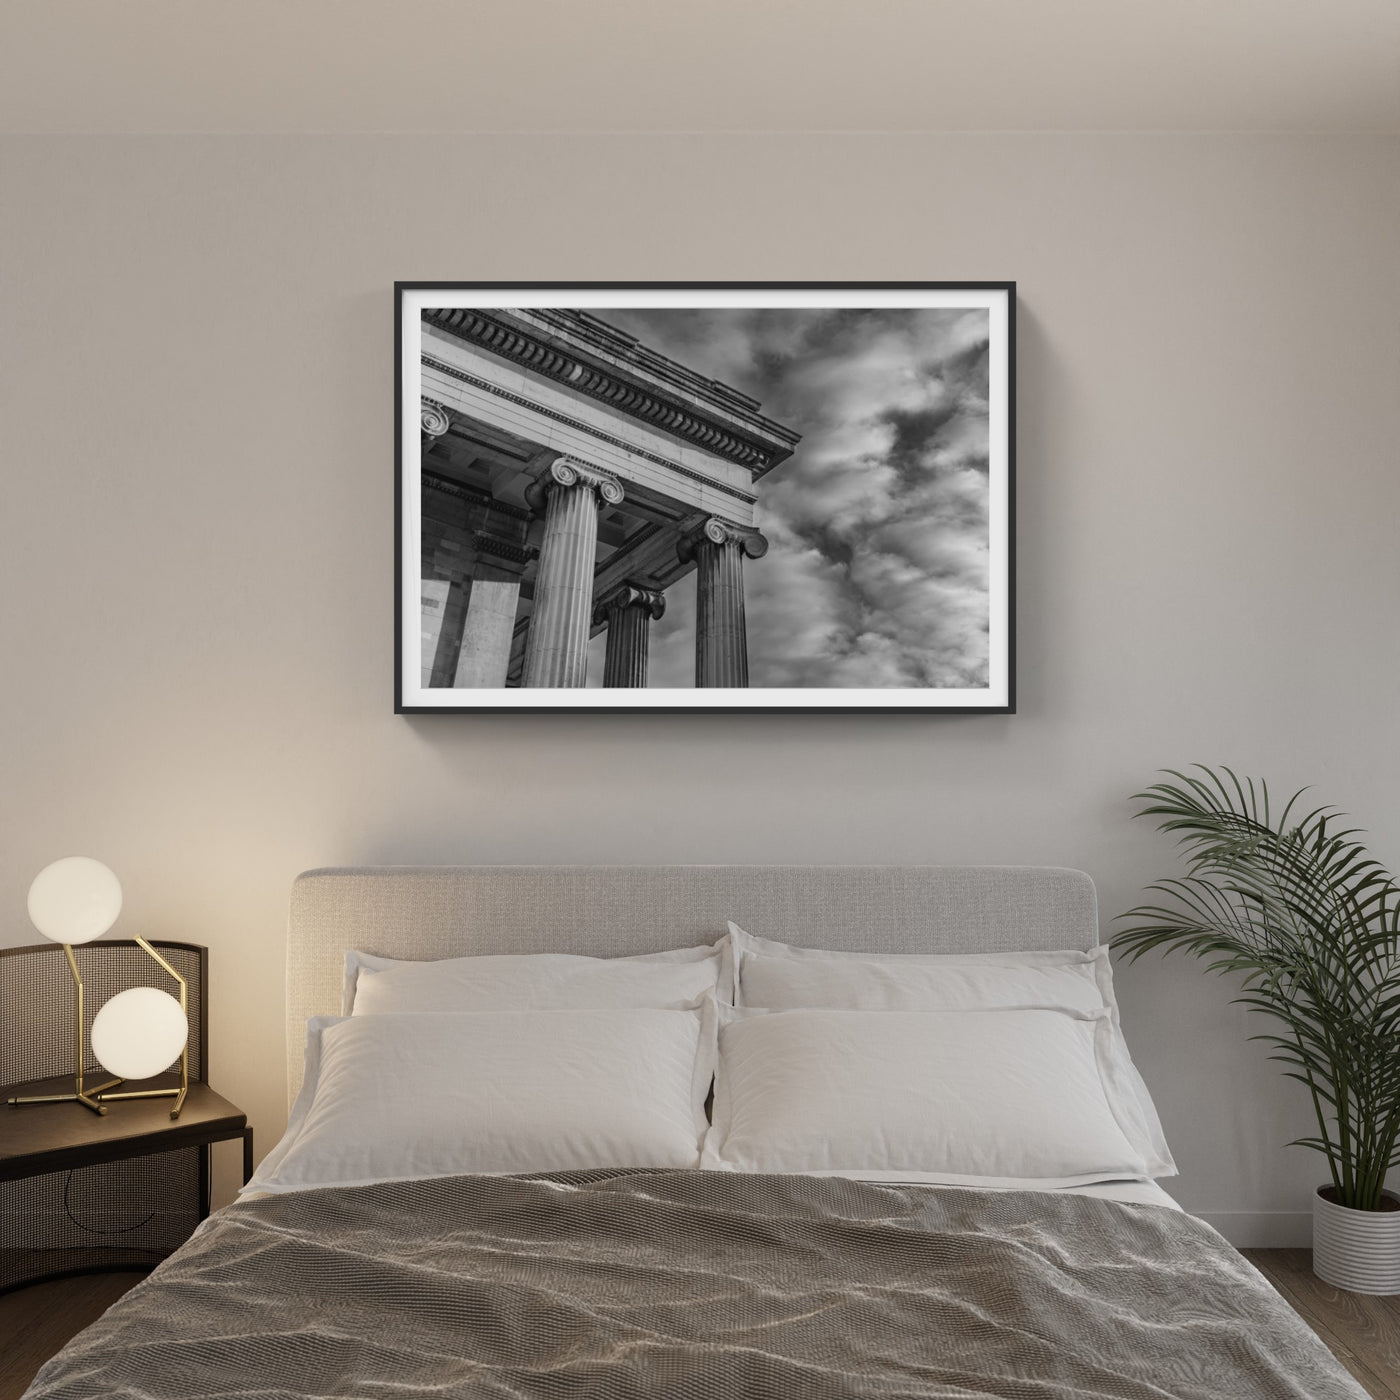 Greek inspired historic building and cloudy sky photo in bedroom